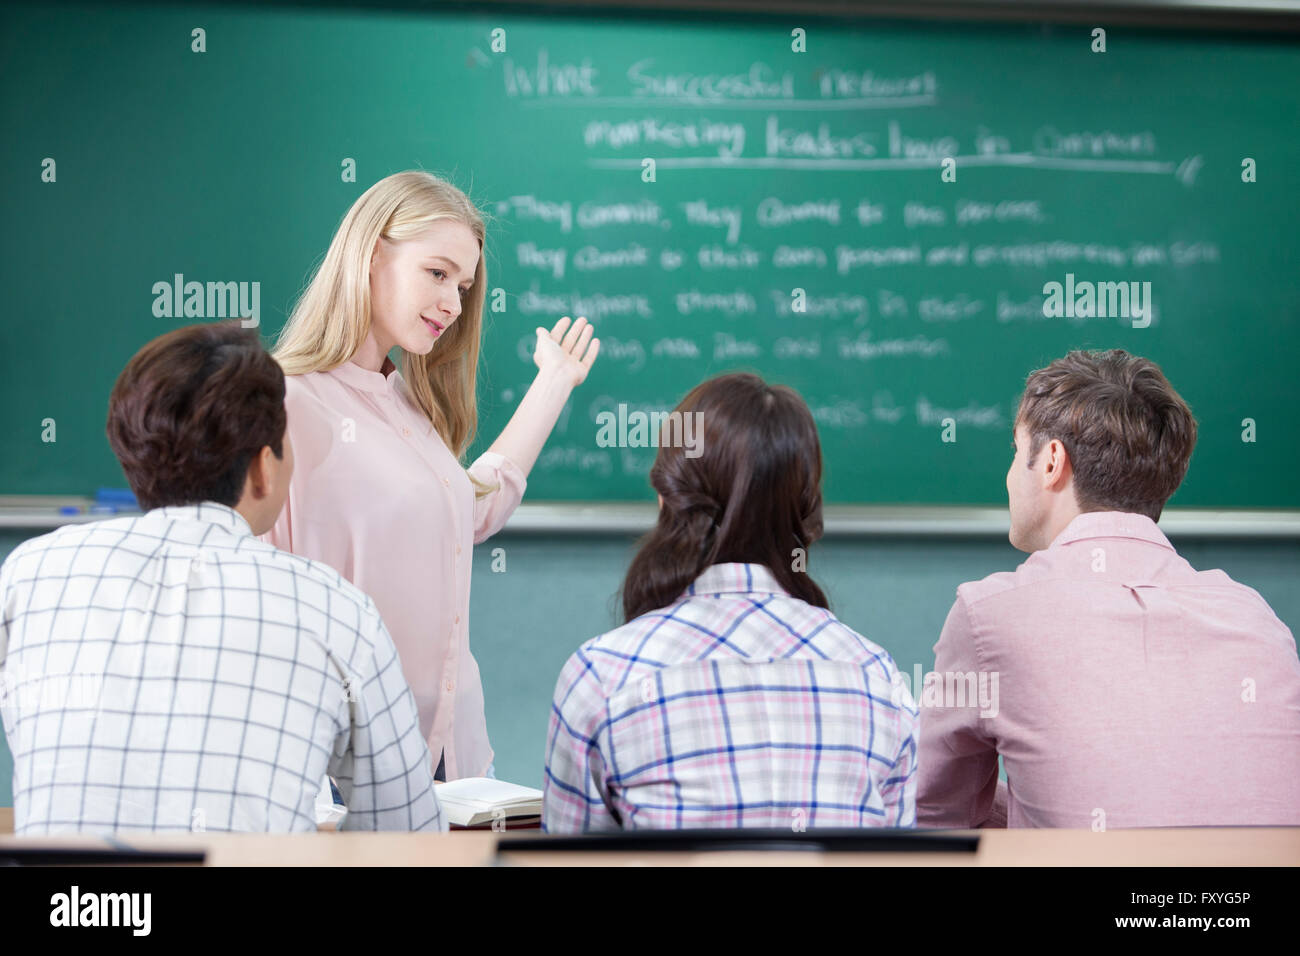 Foreign woman teaching a class and students looking at her representing global education Stock Photo